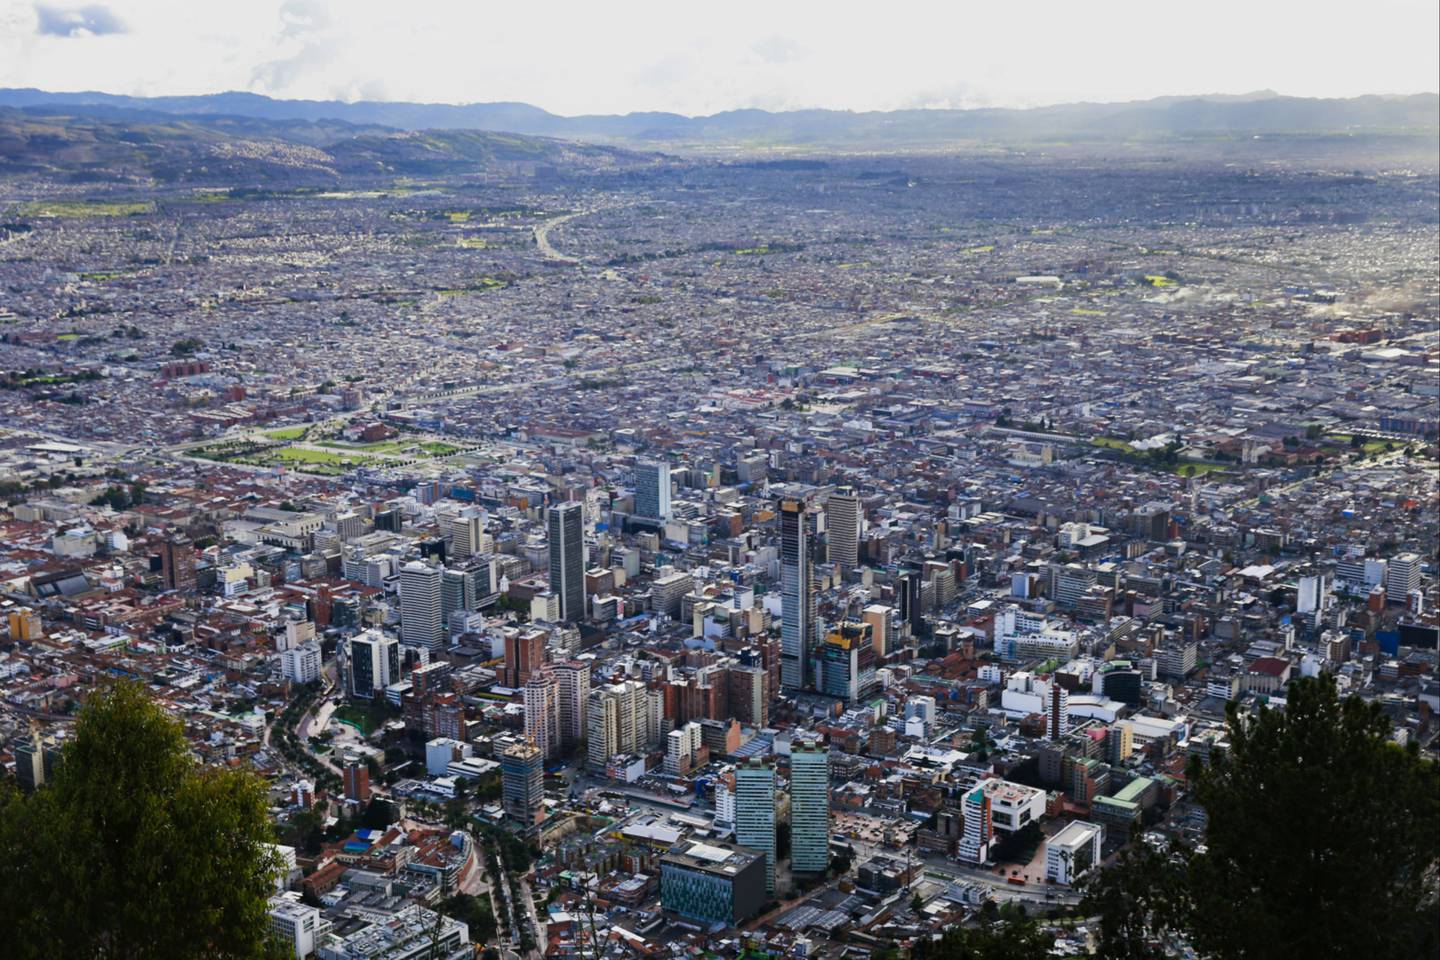 City buildings are seen from Cerro de Monserrate in Bogota, Colombia, on Tuesday, June 16, 2015. Colombia's fiscal deficit will widen next year to the most since 2010 amid lower crude prices, according to the government's latest financial plan. Photographer: Cassi Alexandra/Bloomberg